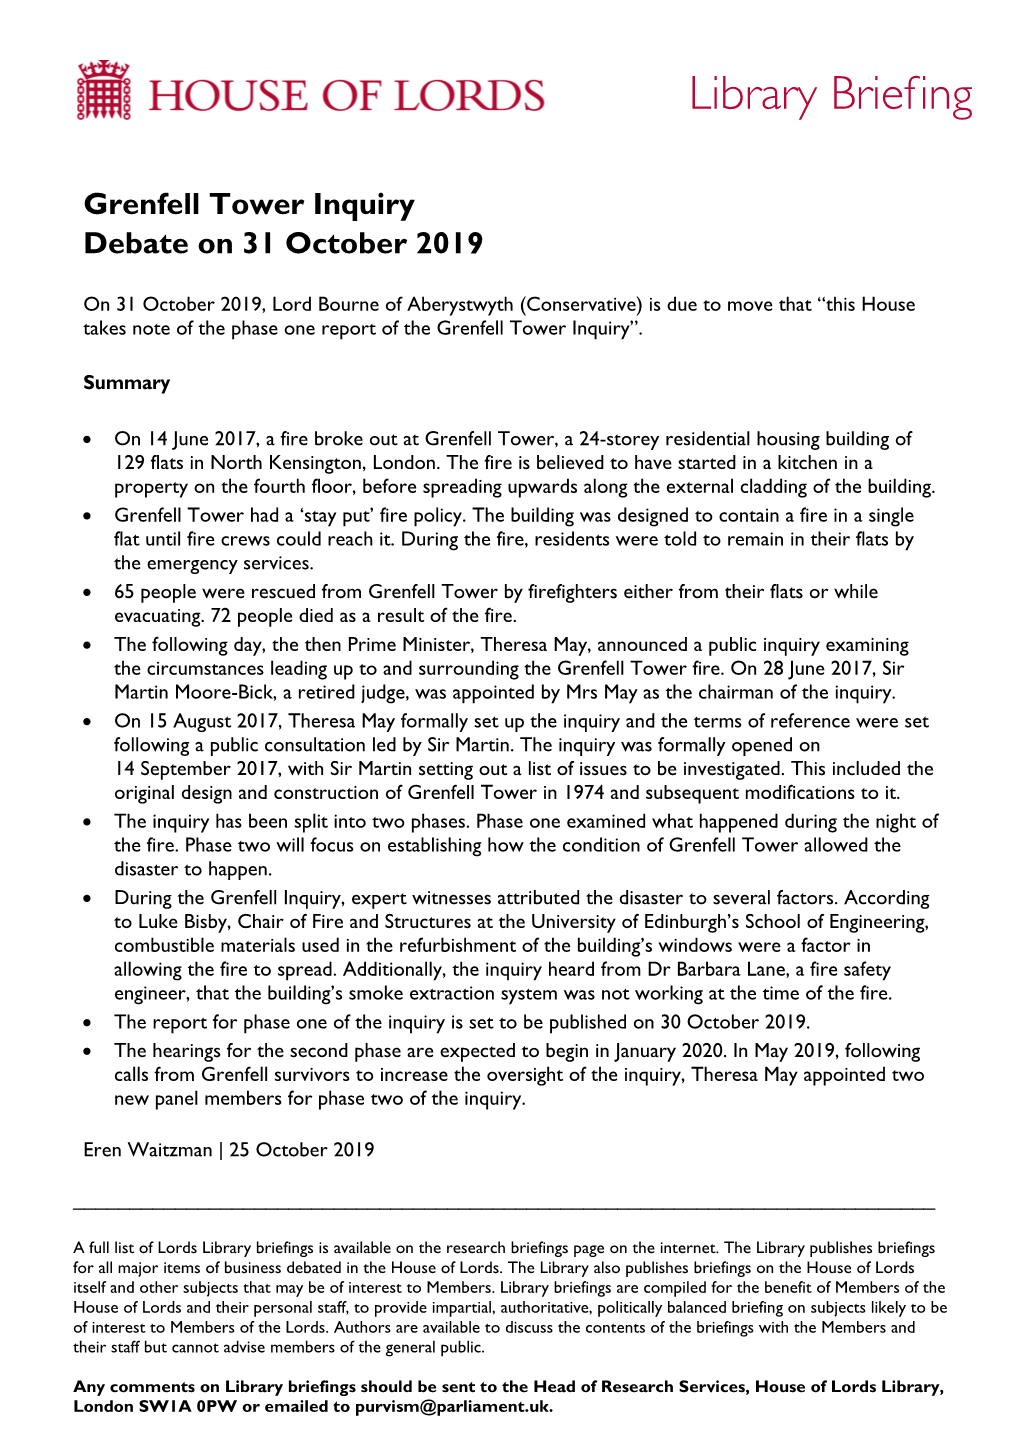 Grenfell Tower Inquiry Debate on 31 October 2019